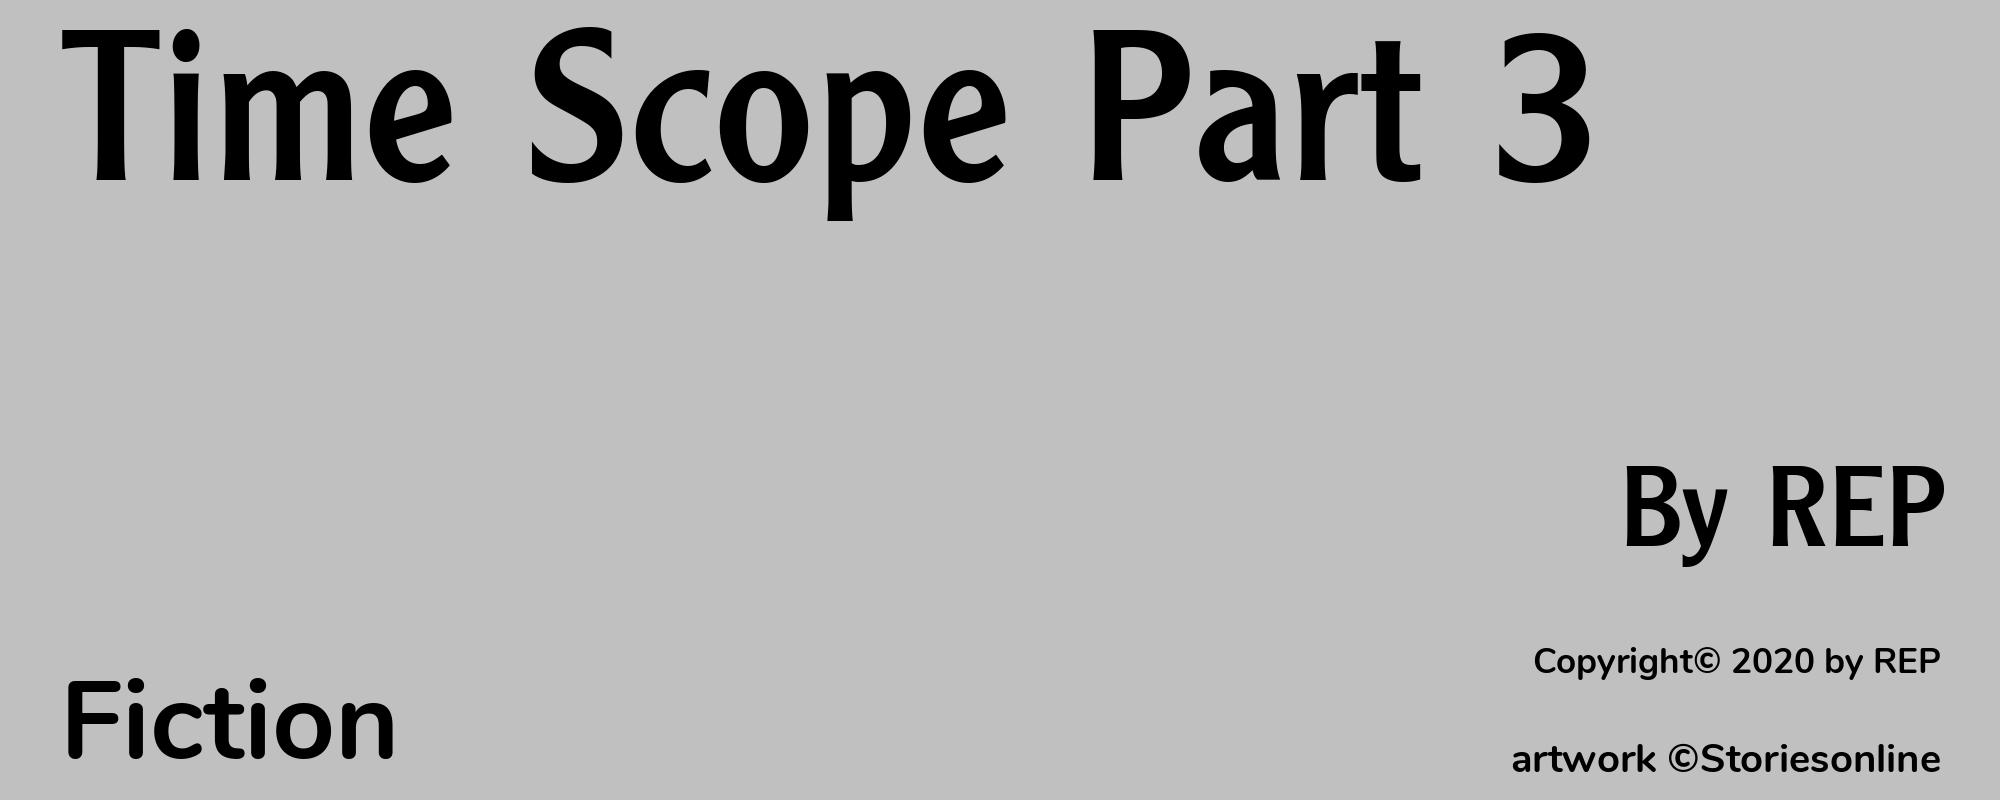 Time Scope Part 3 - Cover